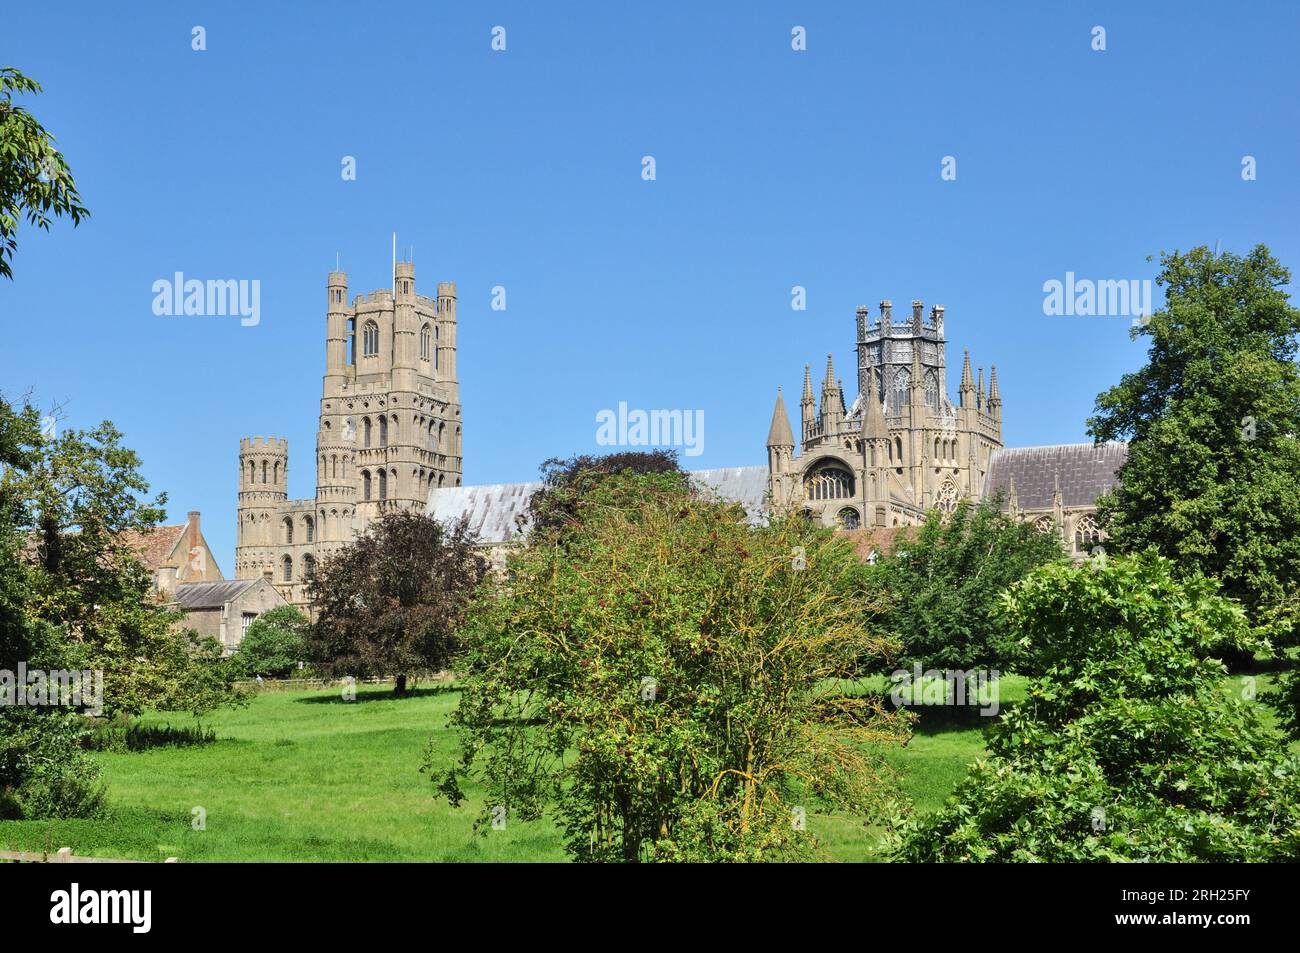 Rural view of the Cathedral and trees from the park in Ely, Cambridgeshire, England, UK Stock Photo